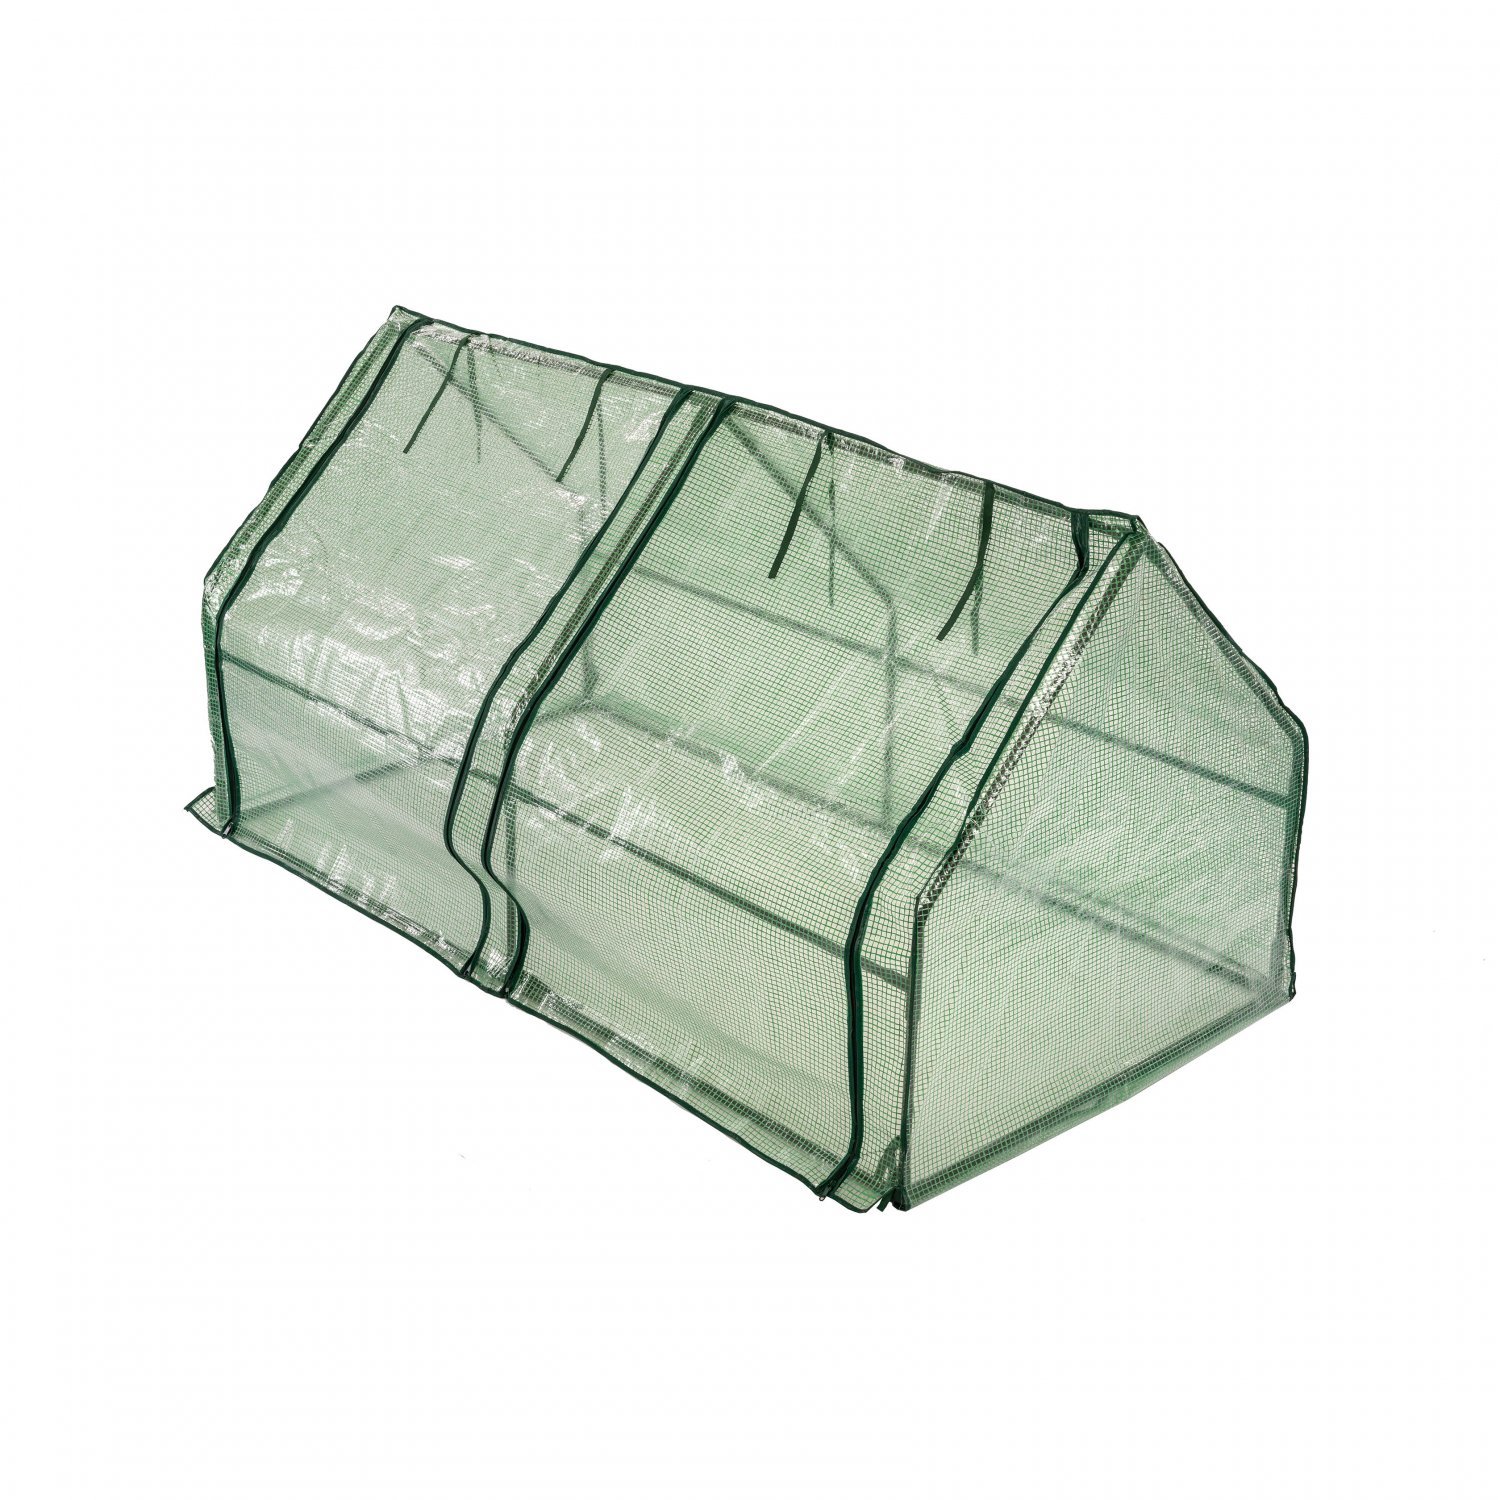 Small Steeple Growhouse Garden Plant Greenhouse with Plastic Mesh Cover